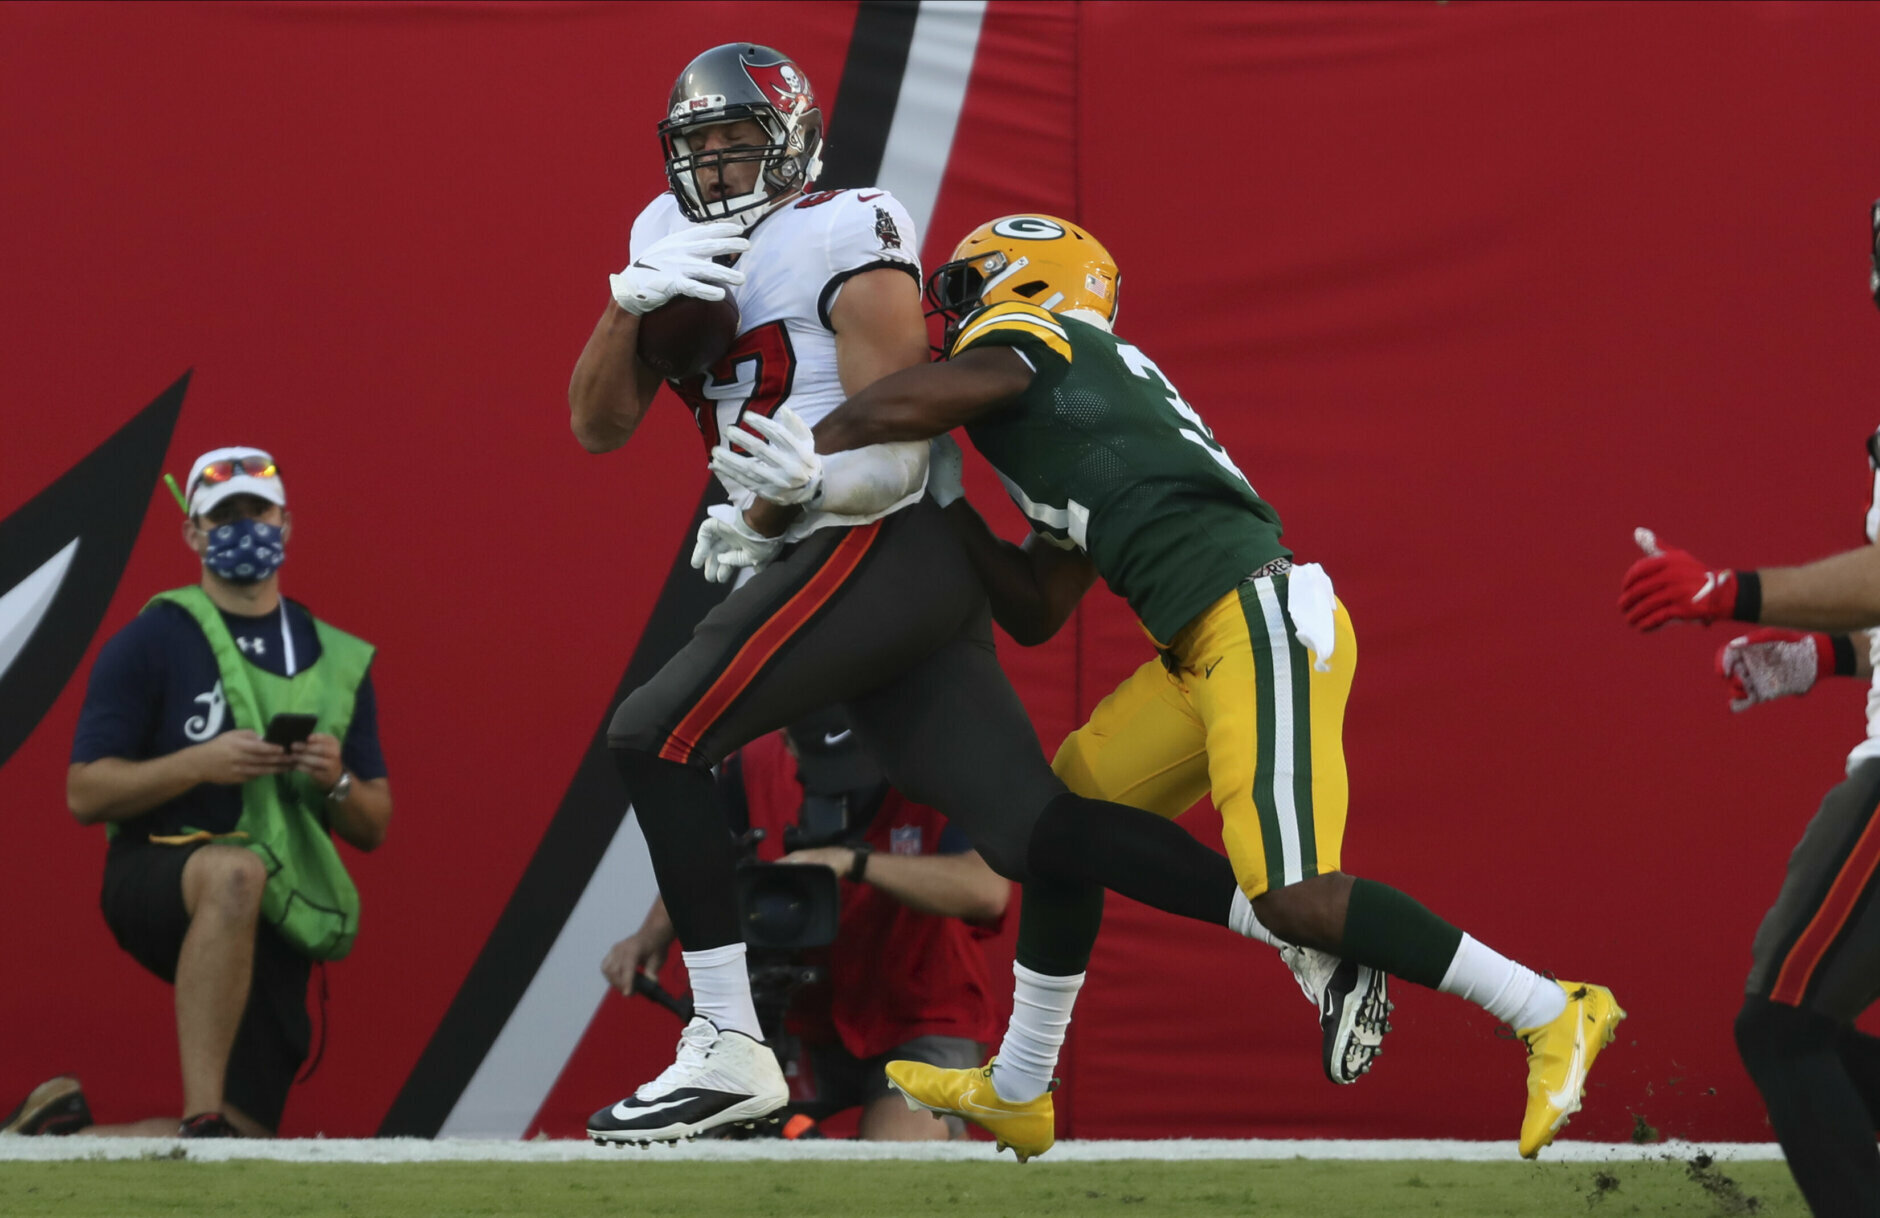 <p><b><i>Packers 10</i></b><br />
<b><i>Bucs 38</i></b></p>
<p>Aaron Rodgers threw <a href="https://profootballtalk.nbcsports.com/2020/10/18/aaron-rodgers-throws-third-career-pick-six-on-his-6215th-career-pass/">a stunningly rare Pick Six</a>, Tom Brady reestablished his connection with Gronk and Tampa Bay had its second penalty-free game in franchise history. Despite <a href="https://www.espn.com/nfl/story/_/id/30143617/green-bay-packers-qb-aaron-rodgers-no-match-tampa-bay-buccaneers-defense-picked-twice-loss" target="_blank" rel="noopener">Rodgers&#8217; spin</a>, this is a statement win for the Bucs that might also give them the leg up on Green Bay in a potential playoff rematch.</p>
